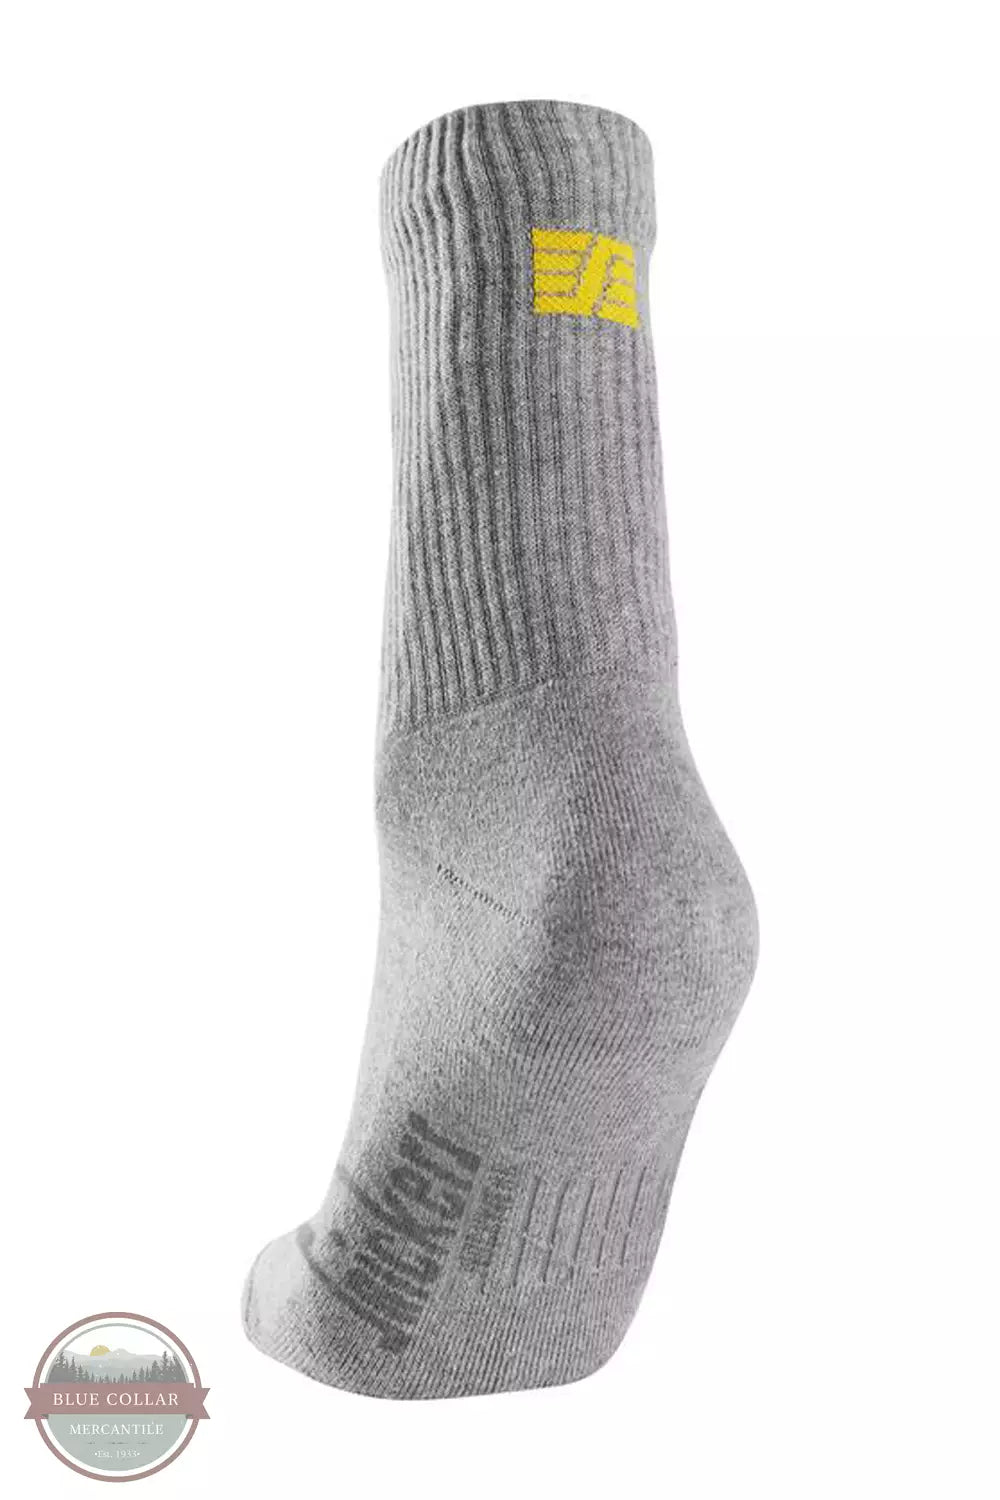 Snicker's Workwear 9214 Cotton Socks 3-Pack Back View